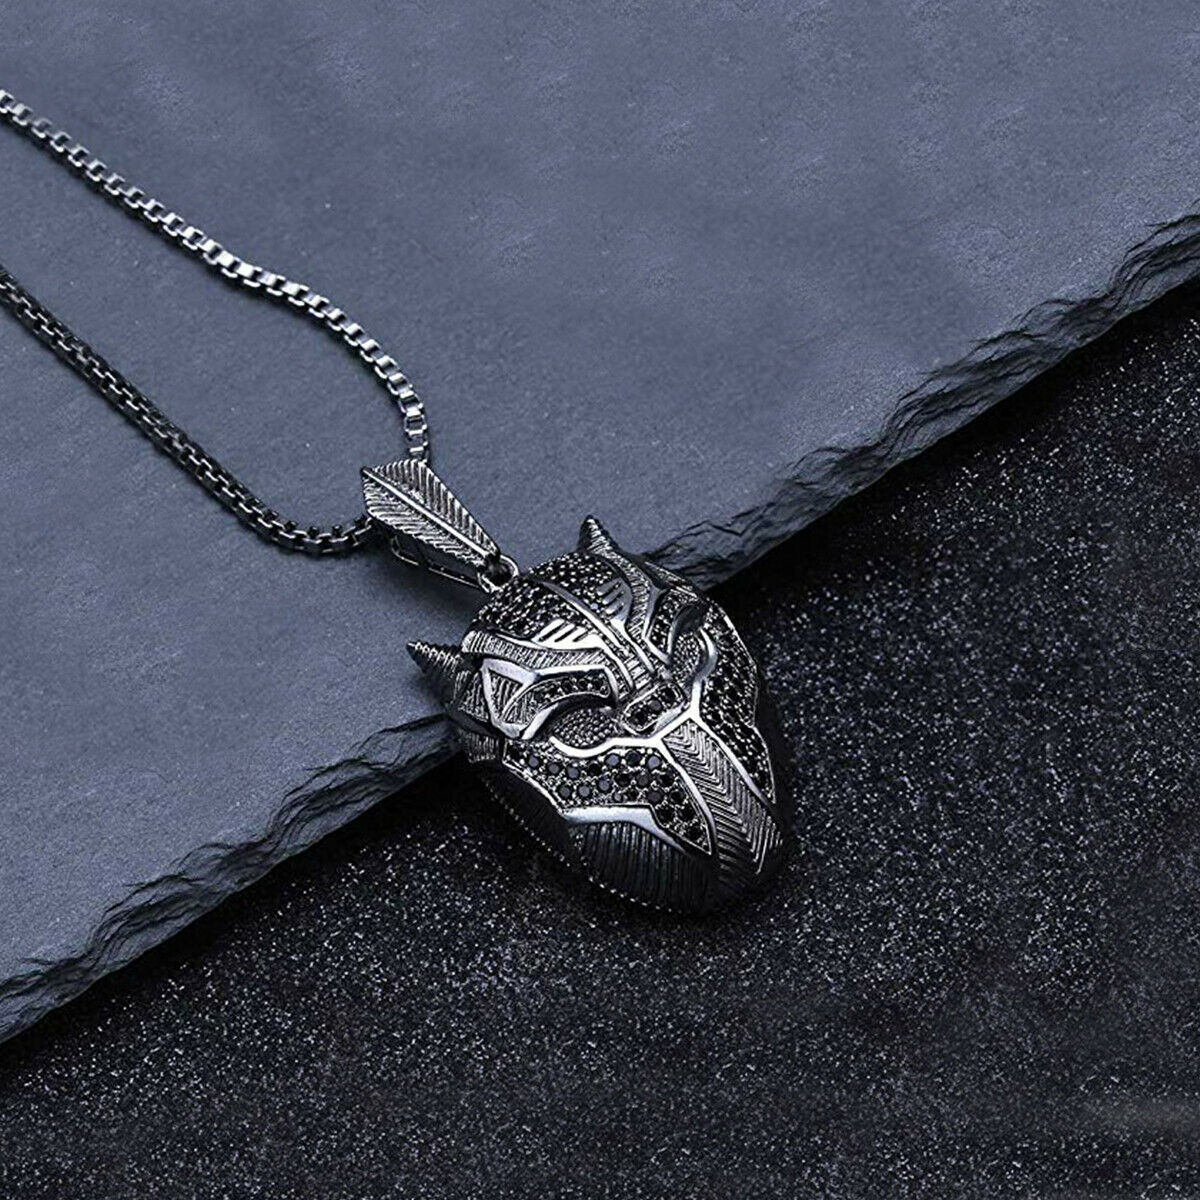 Mens Black Stainless Steel Lion Head Pendant Necklace with Silver Tone Chain 22